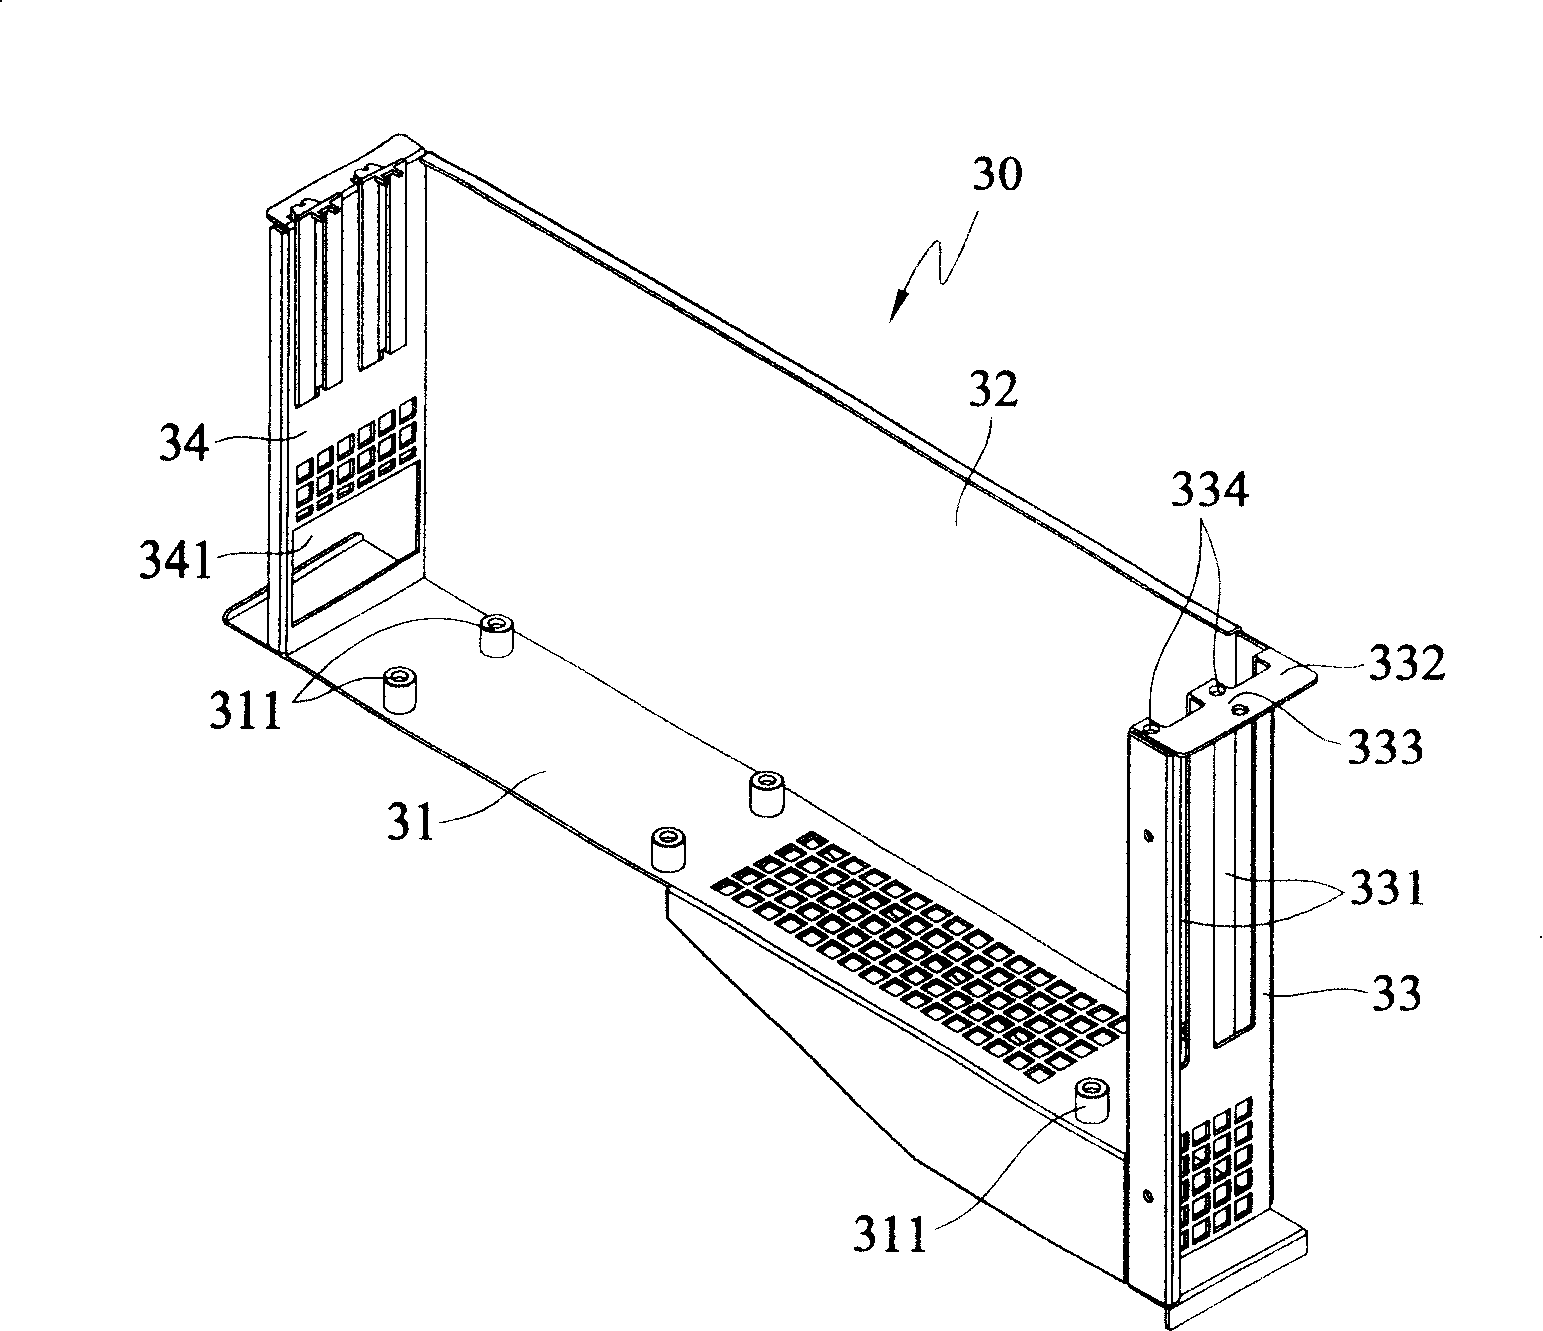 Extending device of abstraction type adapting card